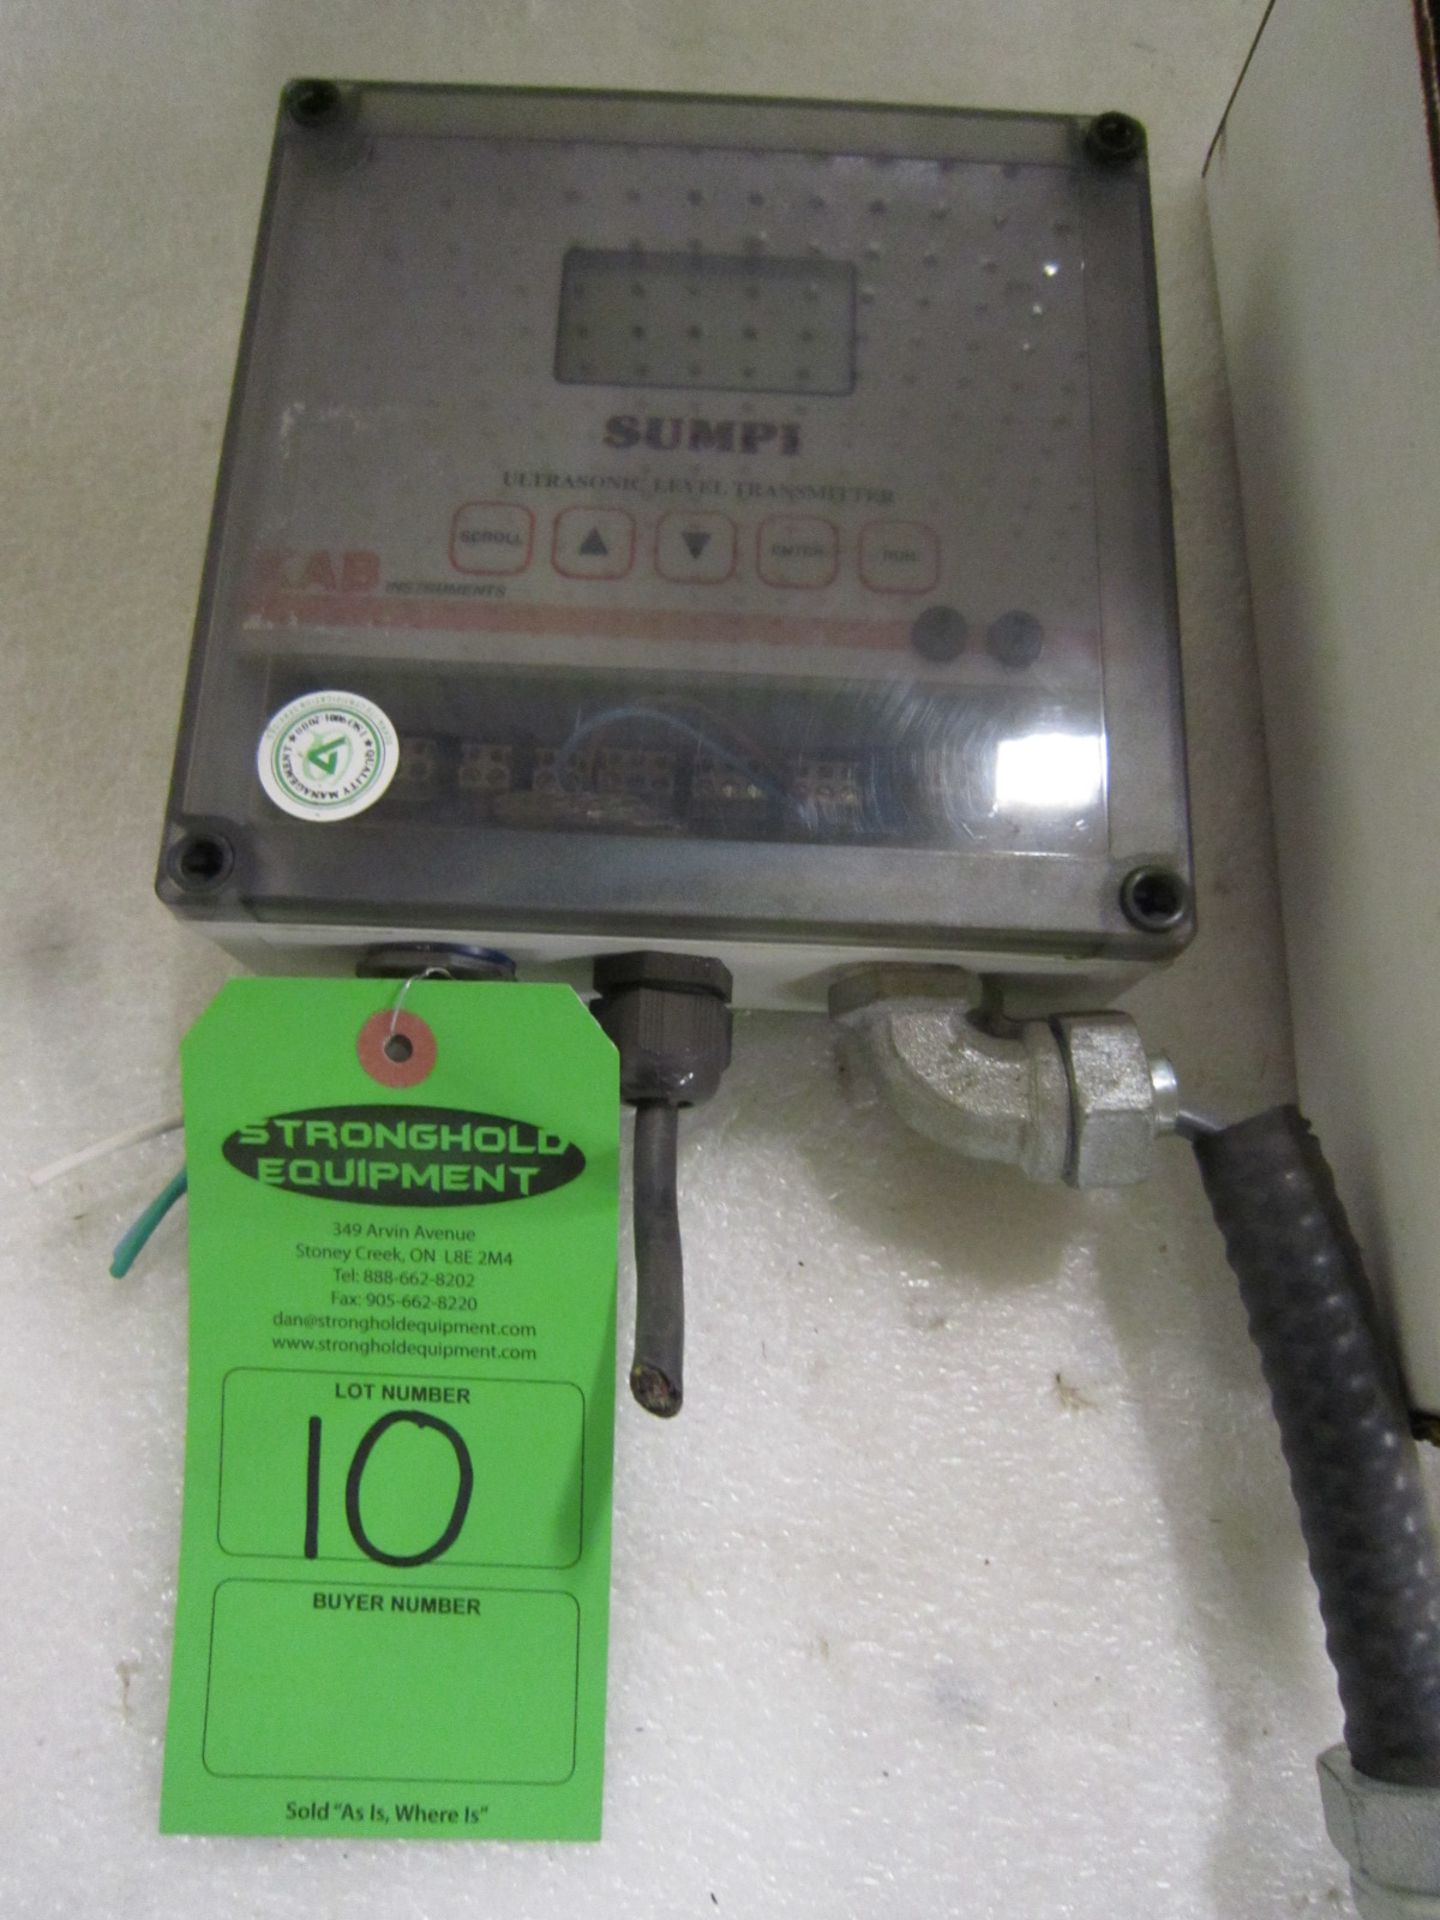 KAB Instruments Sumpi Ultrasonic Level Transmitter with digital readout and test probes - Image 2 of 2